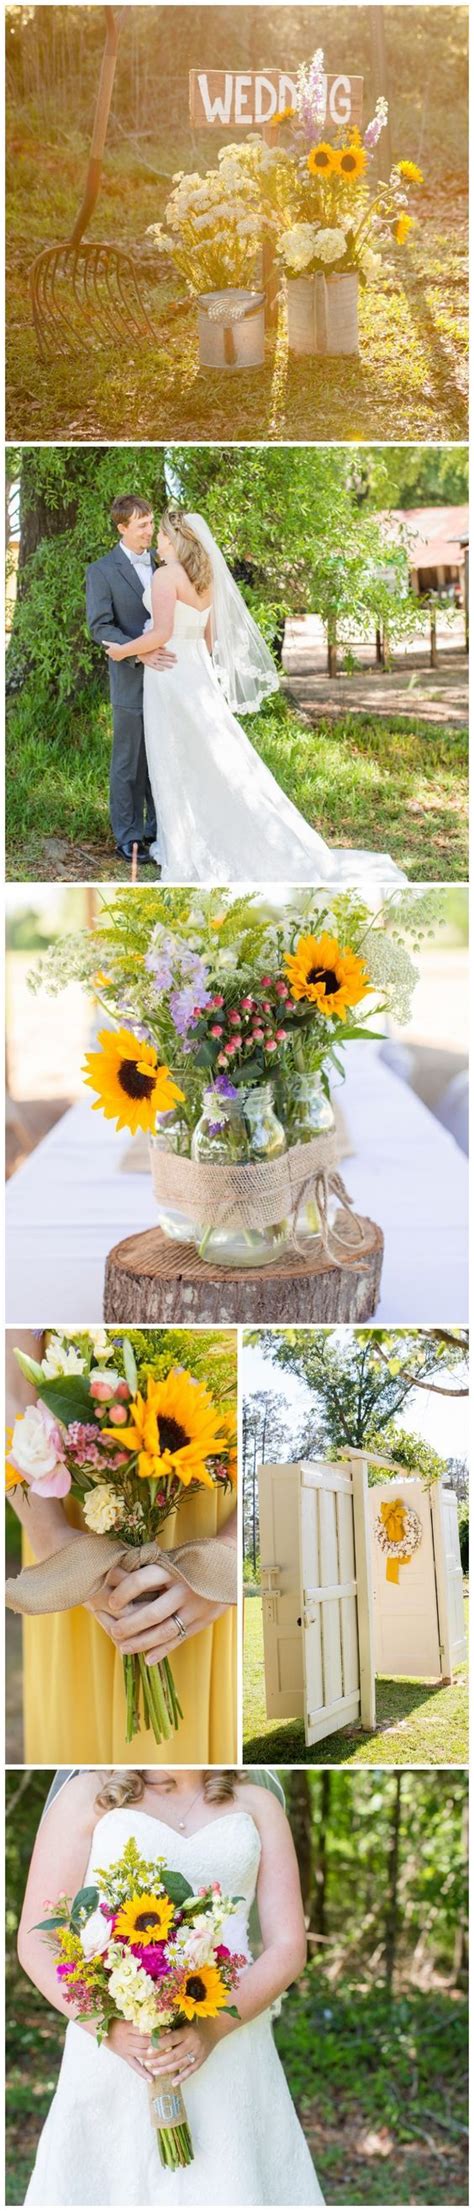 100 Gorgeous Country Rustic Wedding Ideas And Details Rustic Country